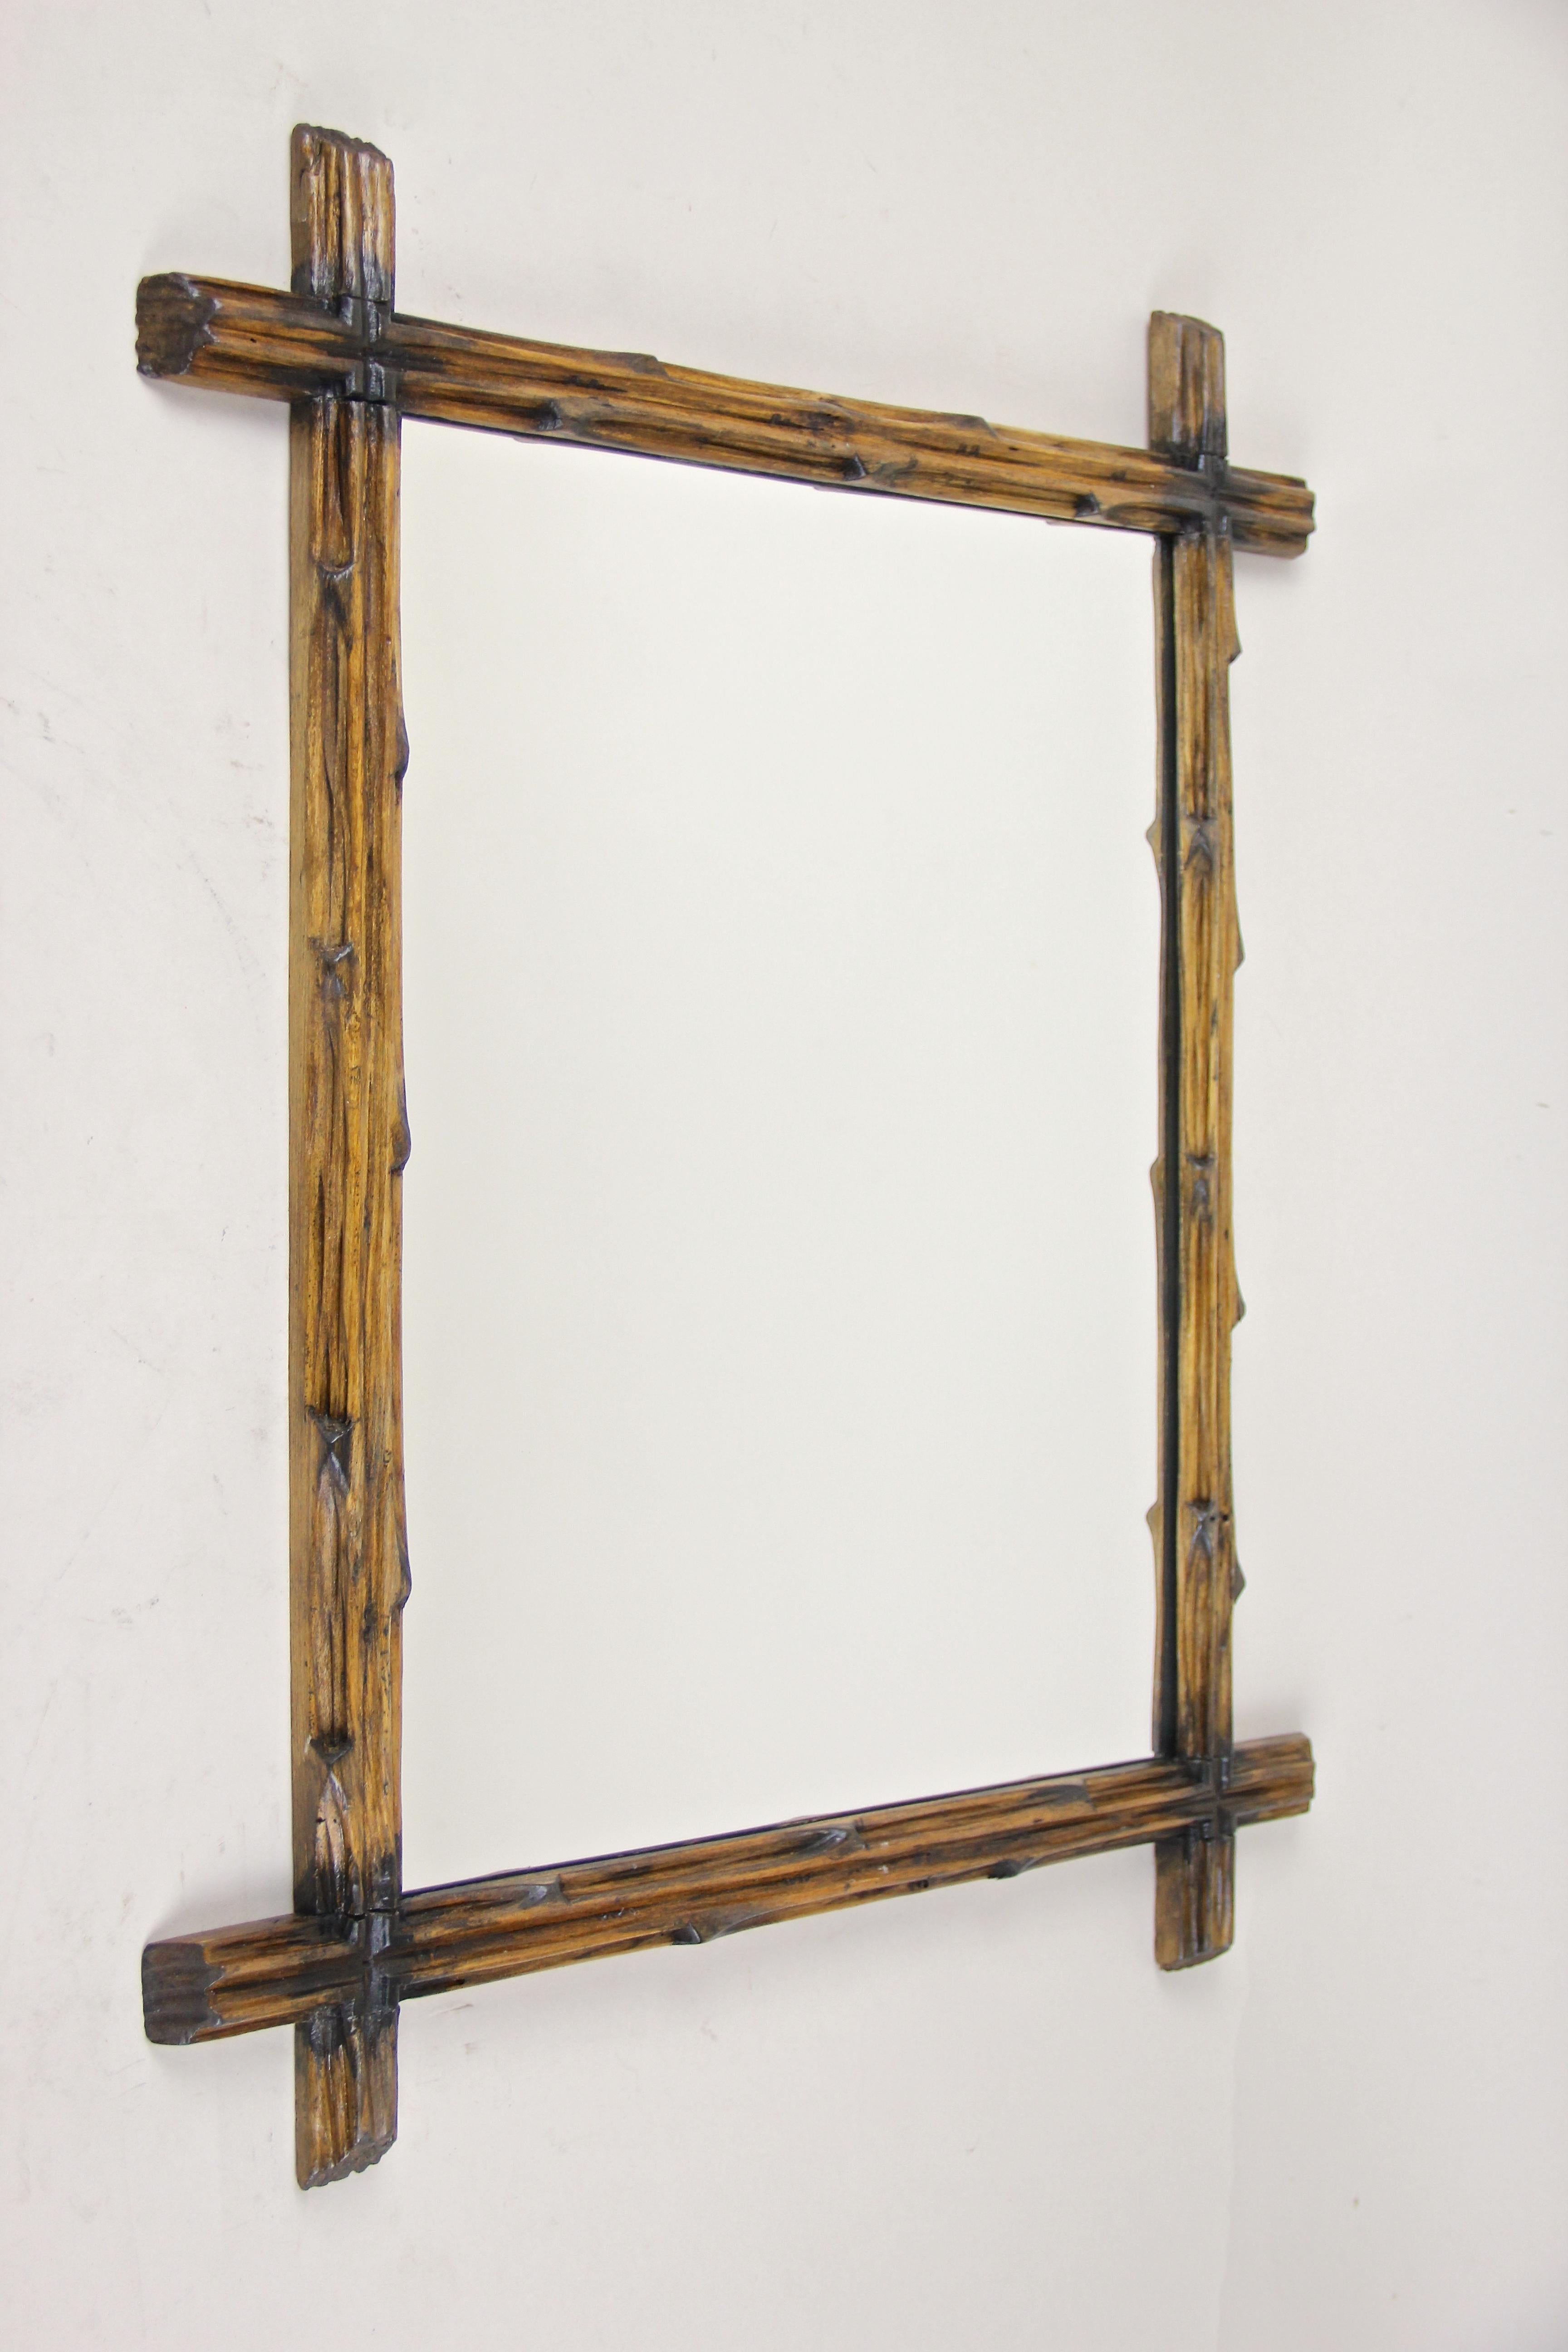 Unusual Rustic Black Forest wall mirror out of Austria. From circa 1890 comes this lovely hand carved black forest wall mirror with a simple but elegant design, created out of basswood and showing the typical 